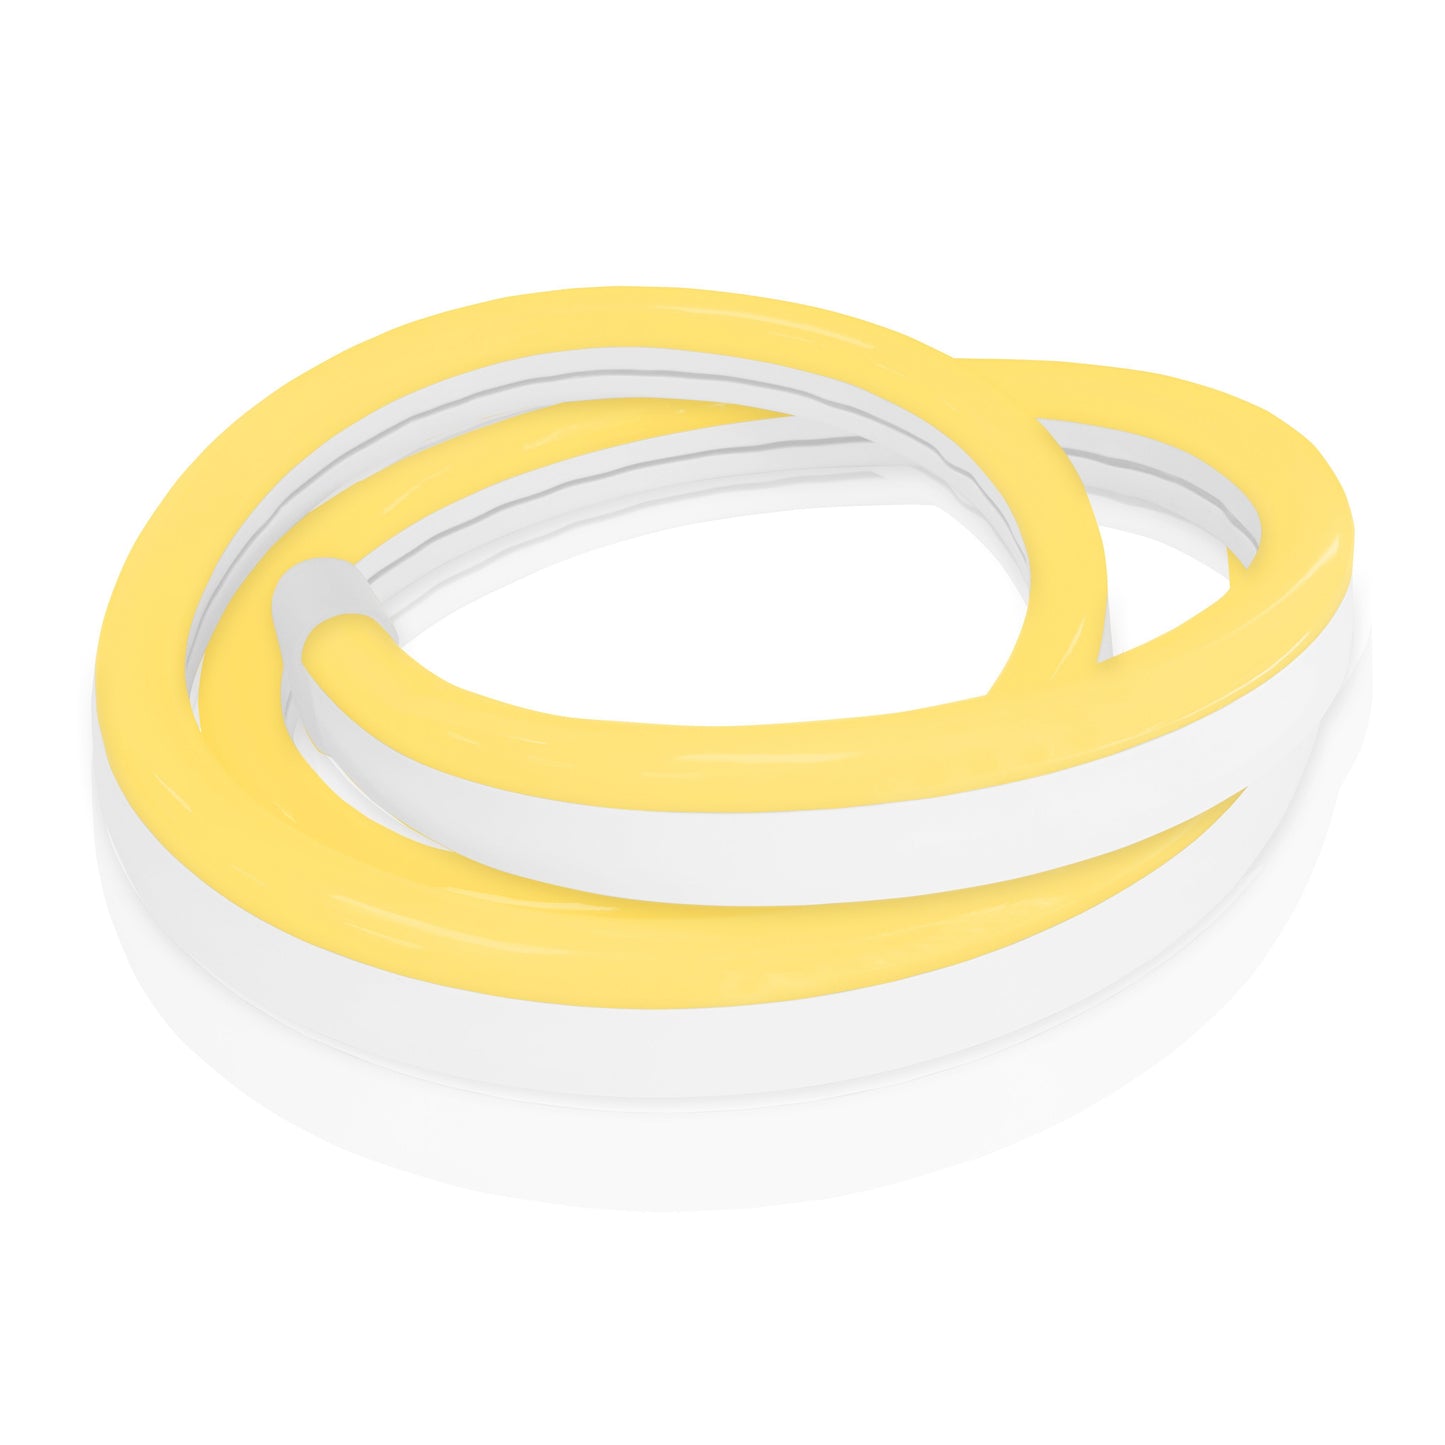 loosely coiled yellow neon led strip light